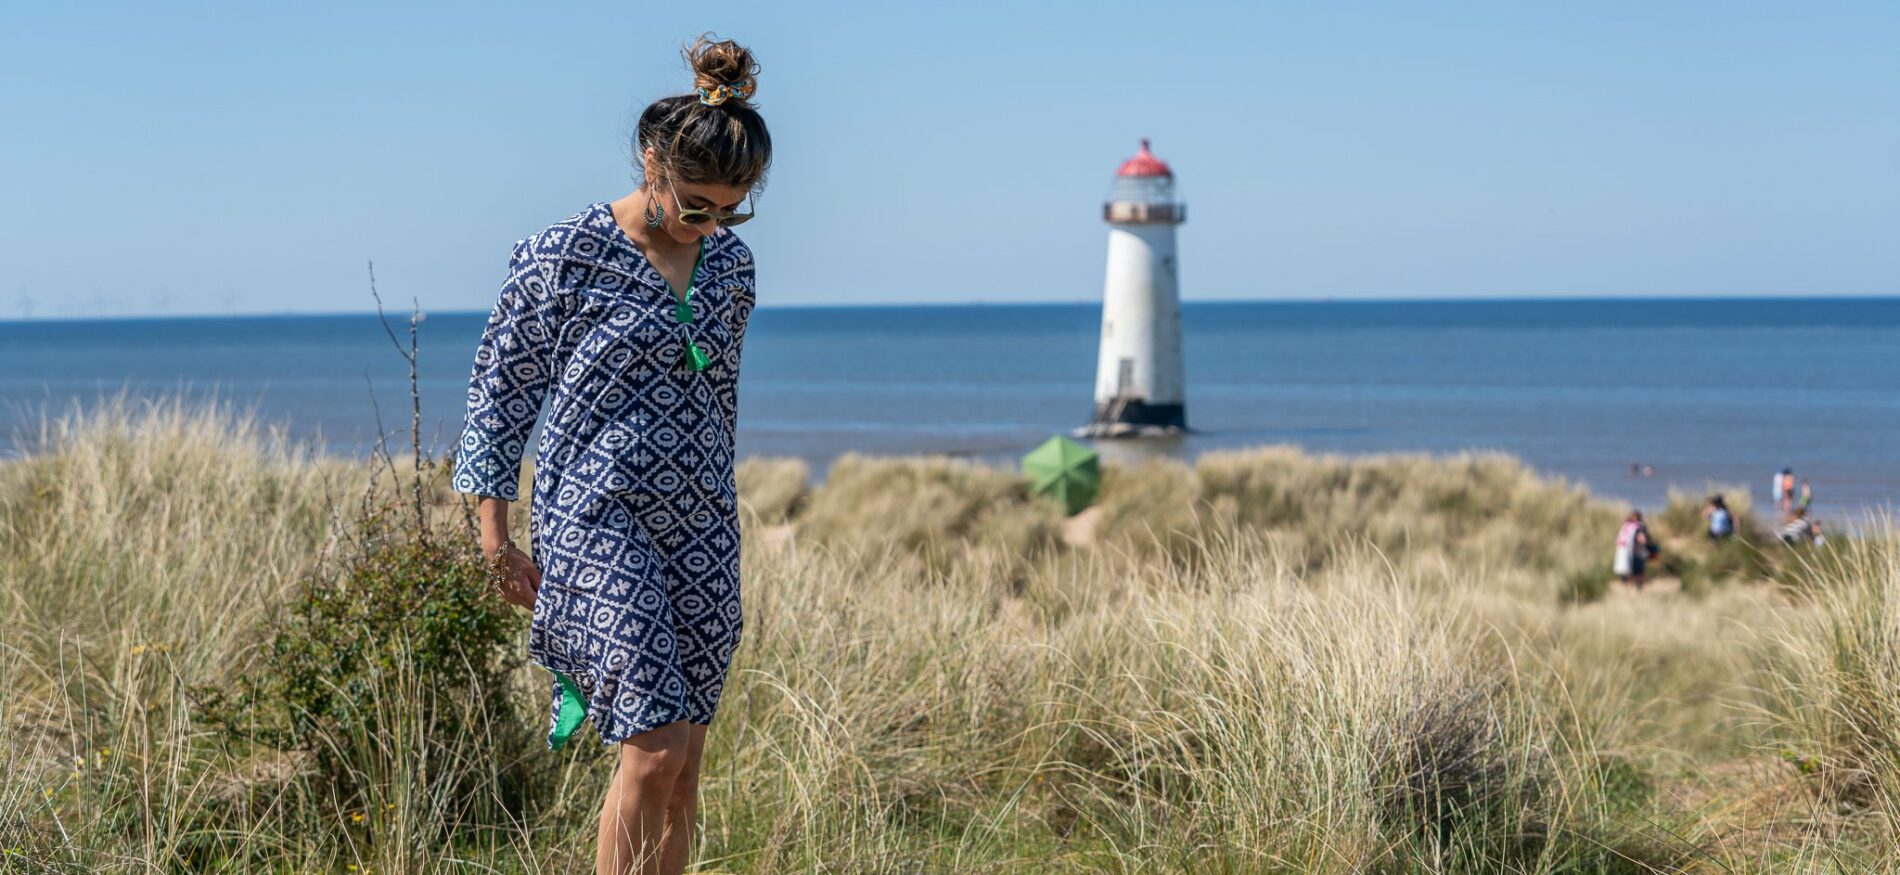 Model in Woven Riches kaftan by lighthouse